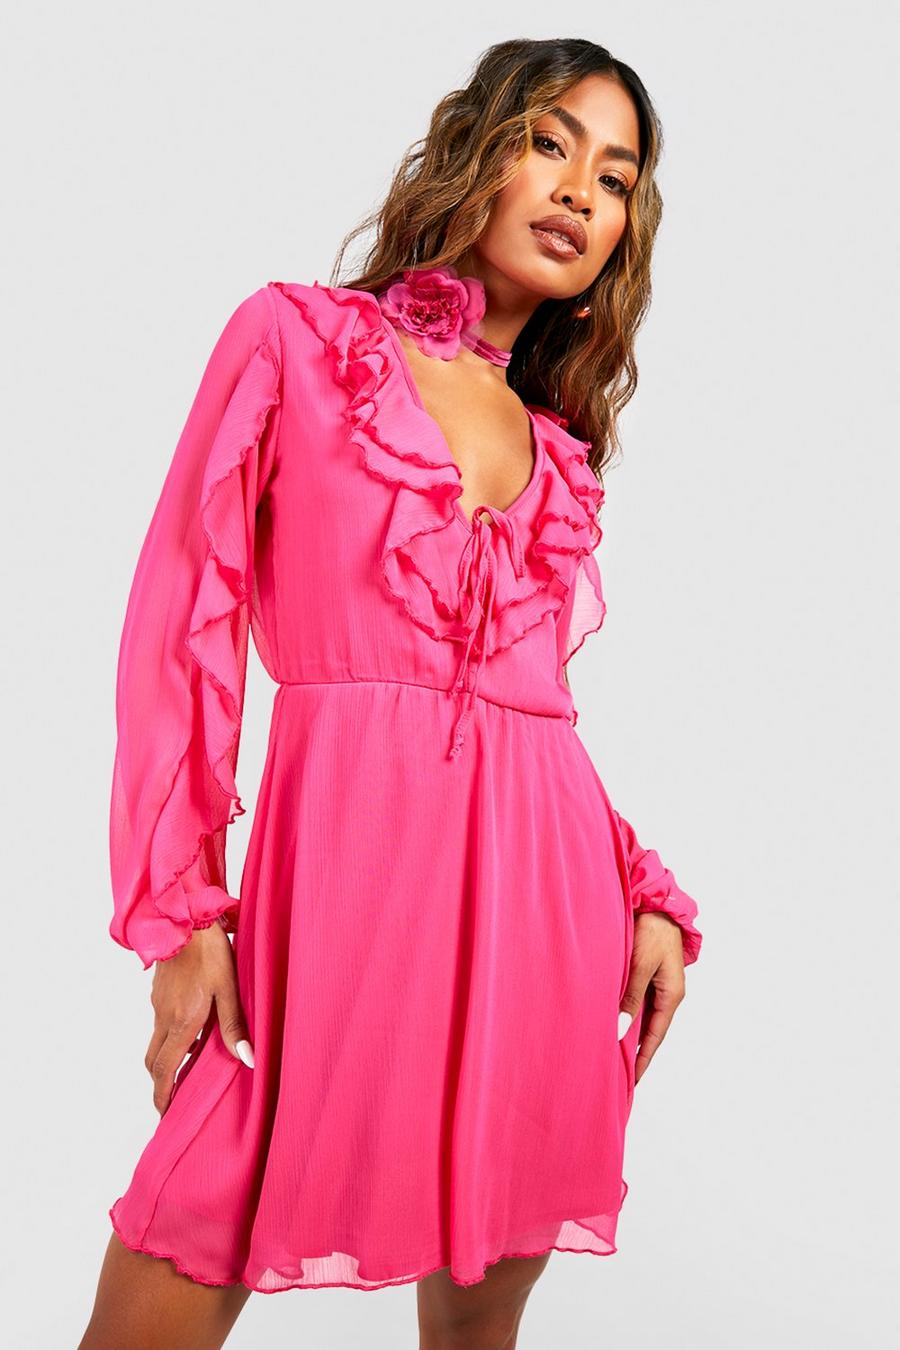 Robe patineuse à volants, Hot pink